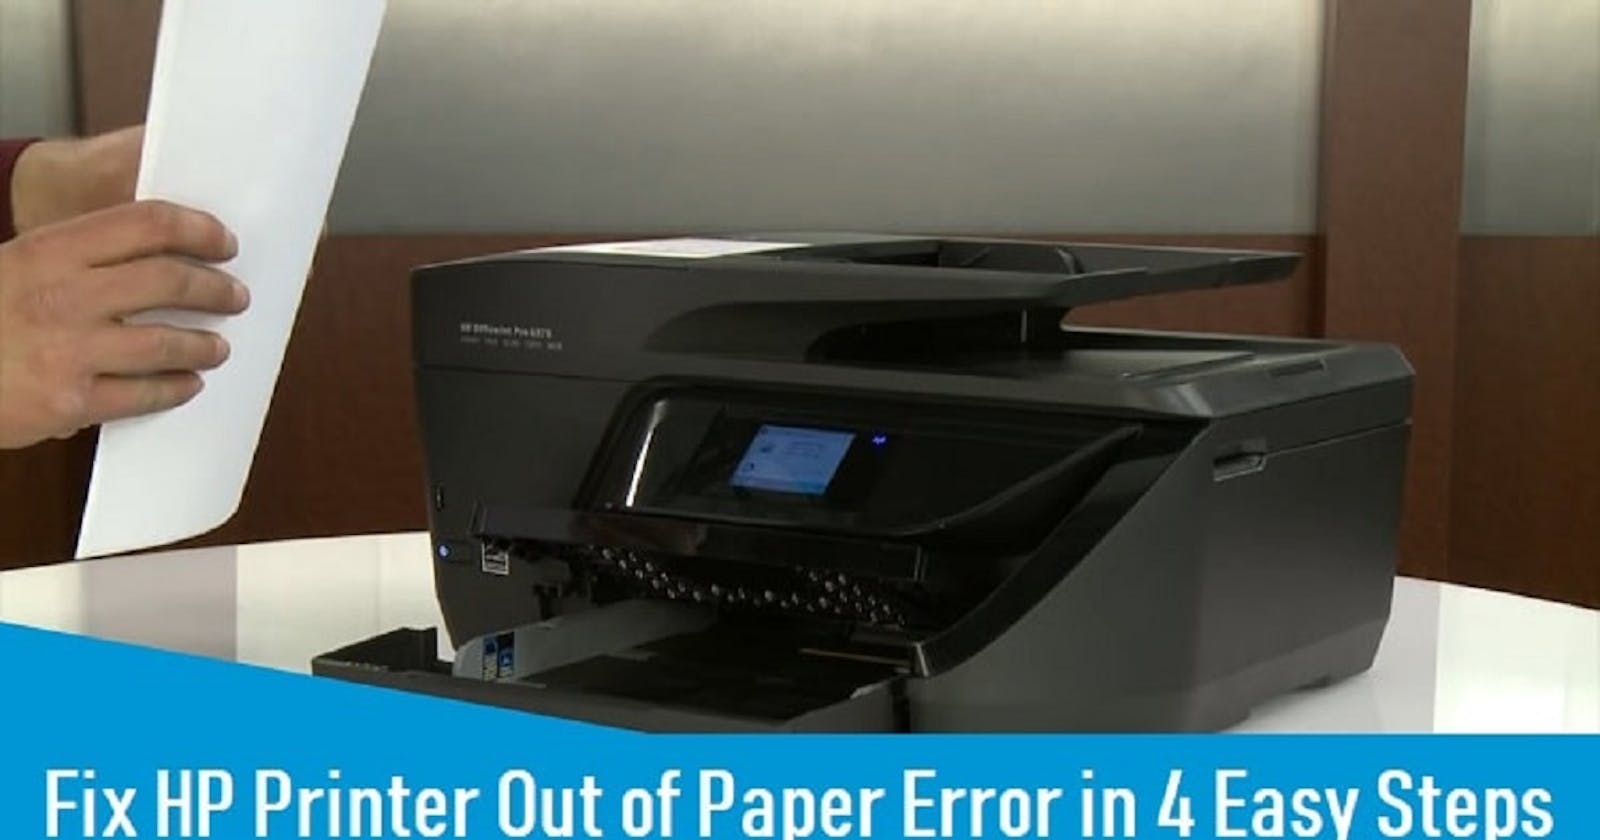 How to Settle HP Printer Keeps Saying Out of Paper Error?